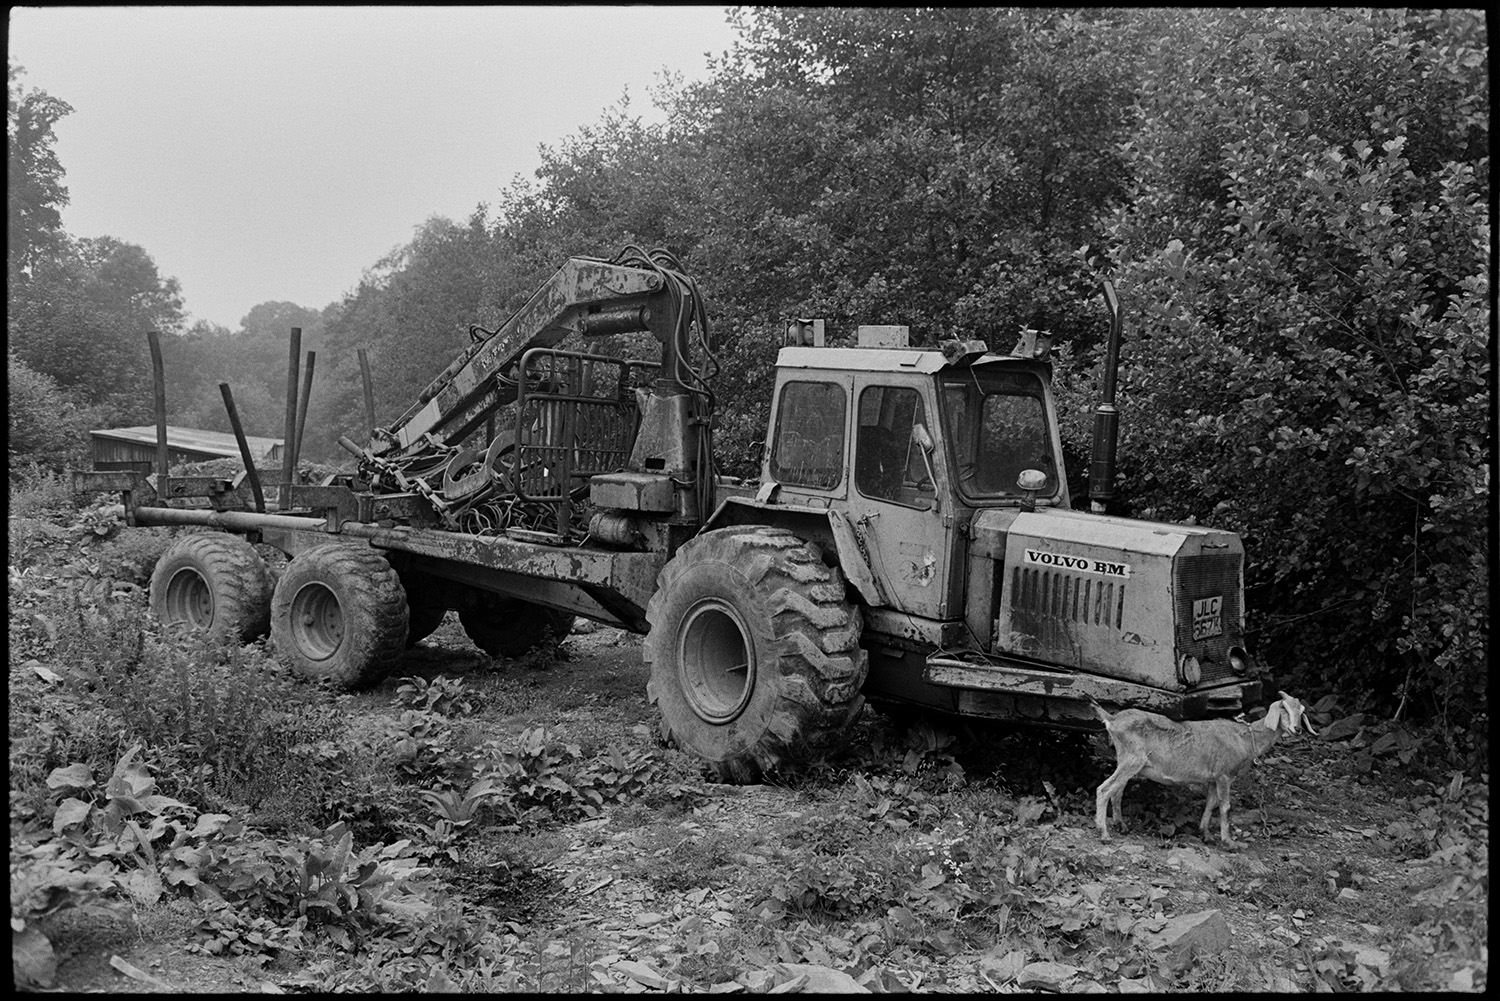 Tree felling machine parked beside road, with goat. Tractor.
[Tree felling machine and Volvo tractor parked in a wooded area at Millhams, Dolton. A goat is stood in front of the tractor.]